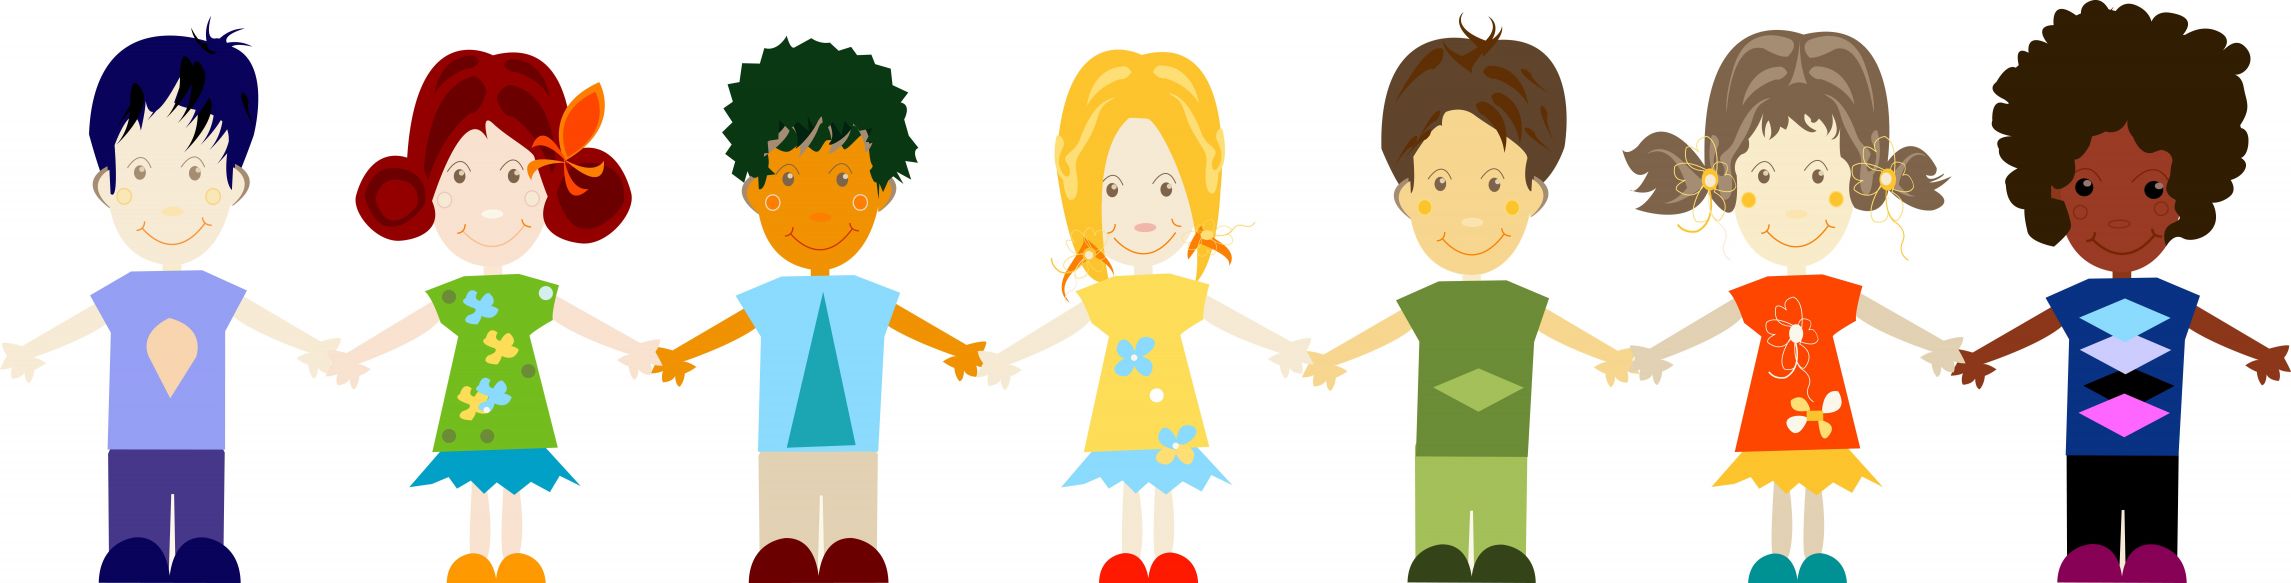 children-playing-together- ... - ClipArt Best - ClipArt Best